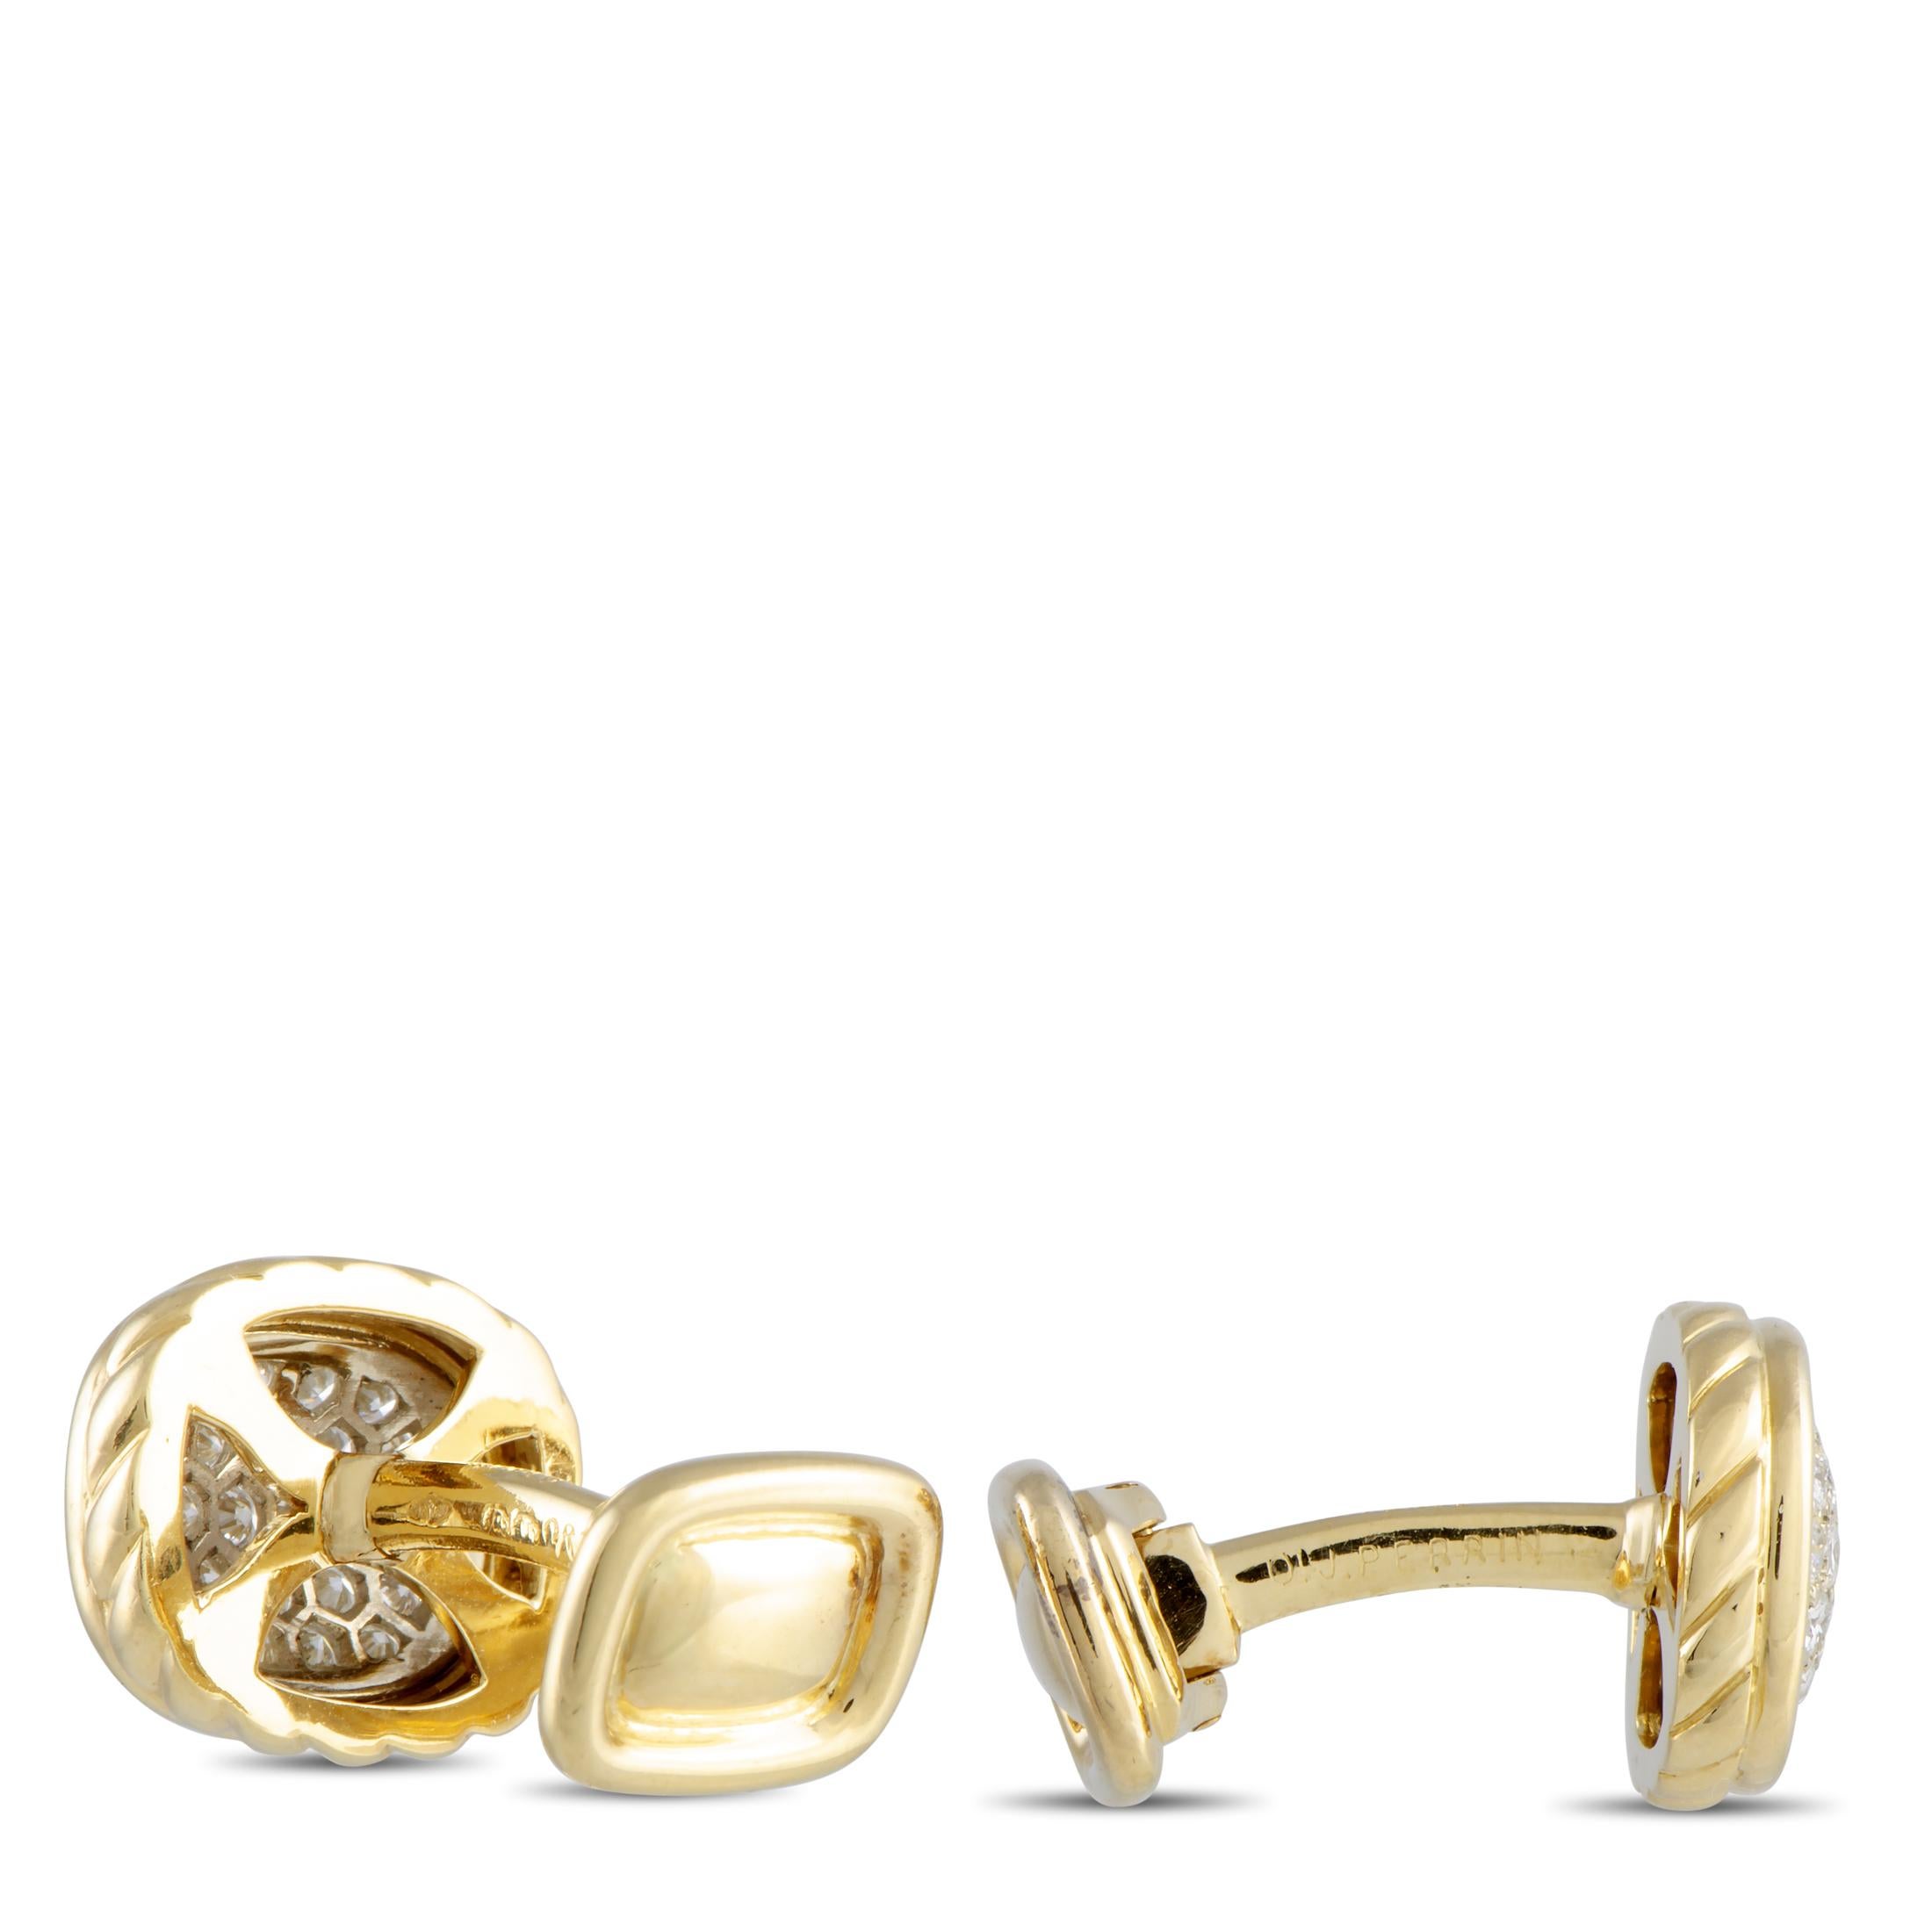 These O.J.Perrin cufflinks are made of 18K yellow gold and each of the two weighs 9.7 grams for a total weight of 19.4 grams. The cufflinks measure 0.60” by 0.50” and are set with a total of 1.80 carats of diamonds boasting grade G color and VVS